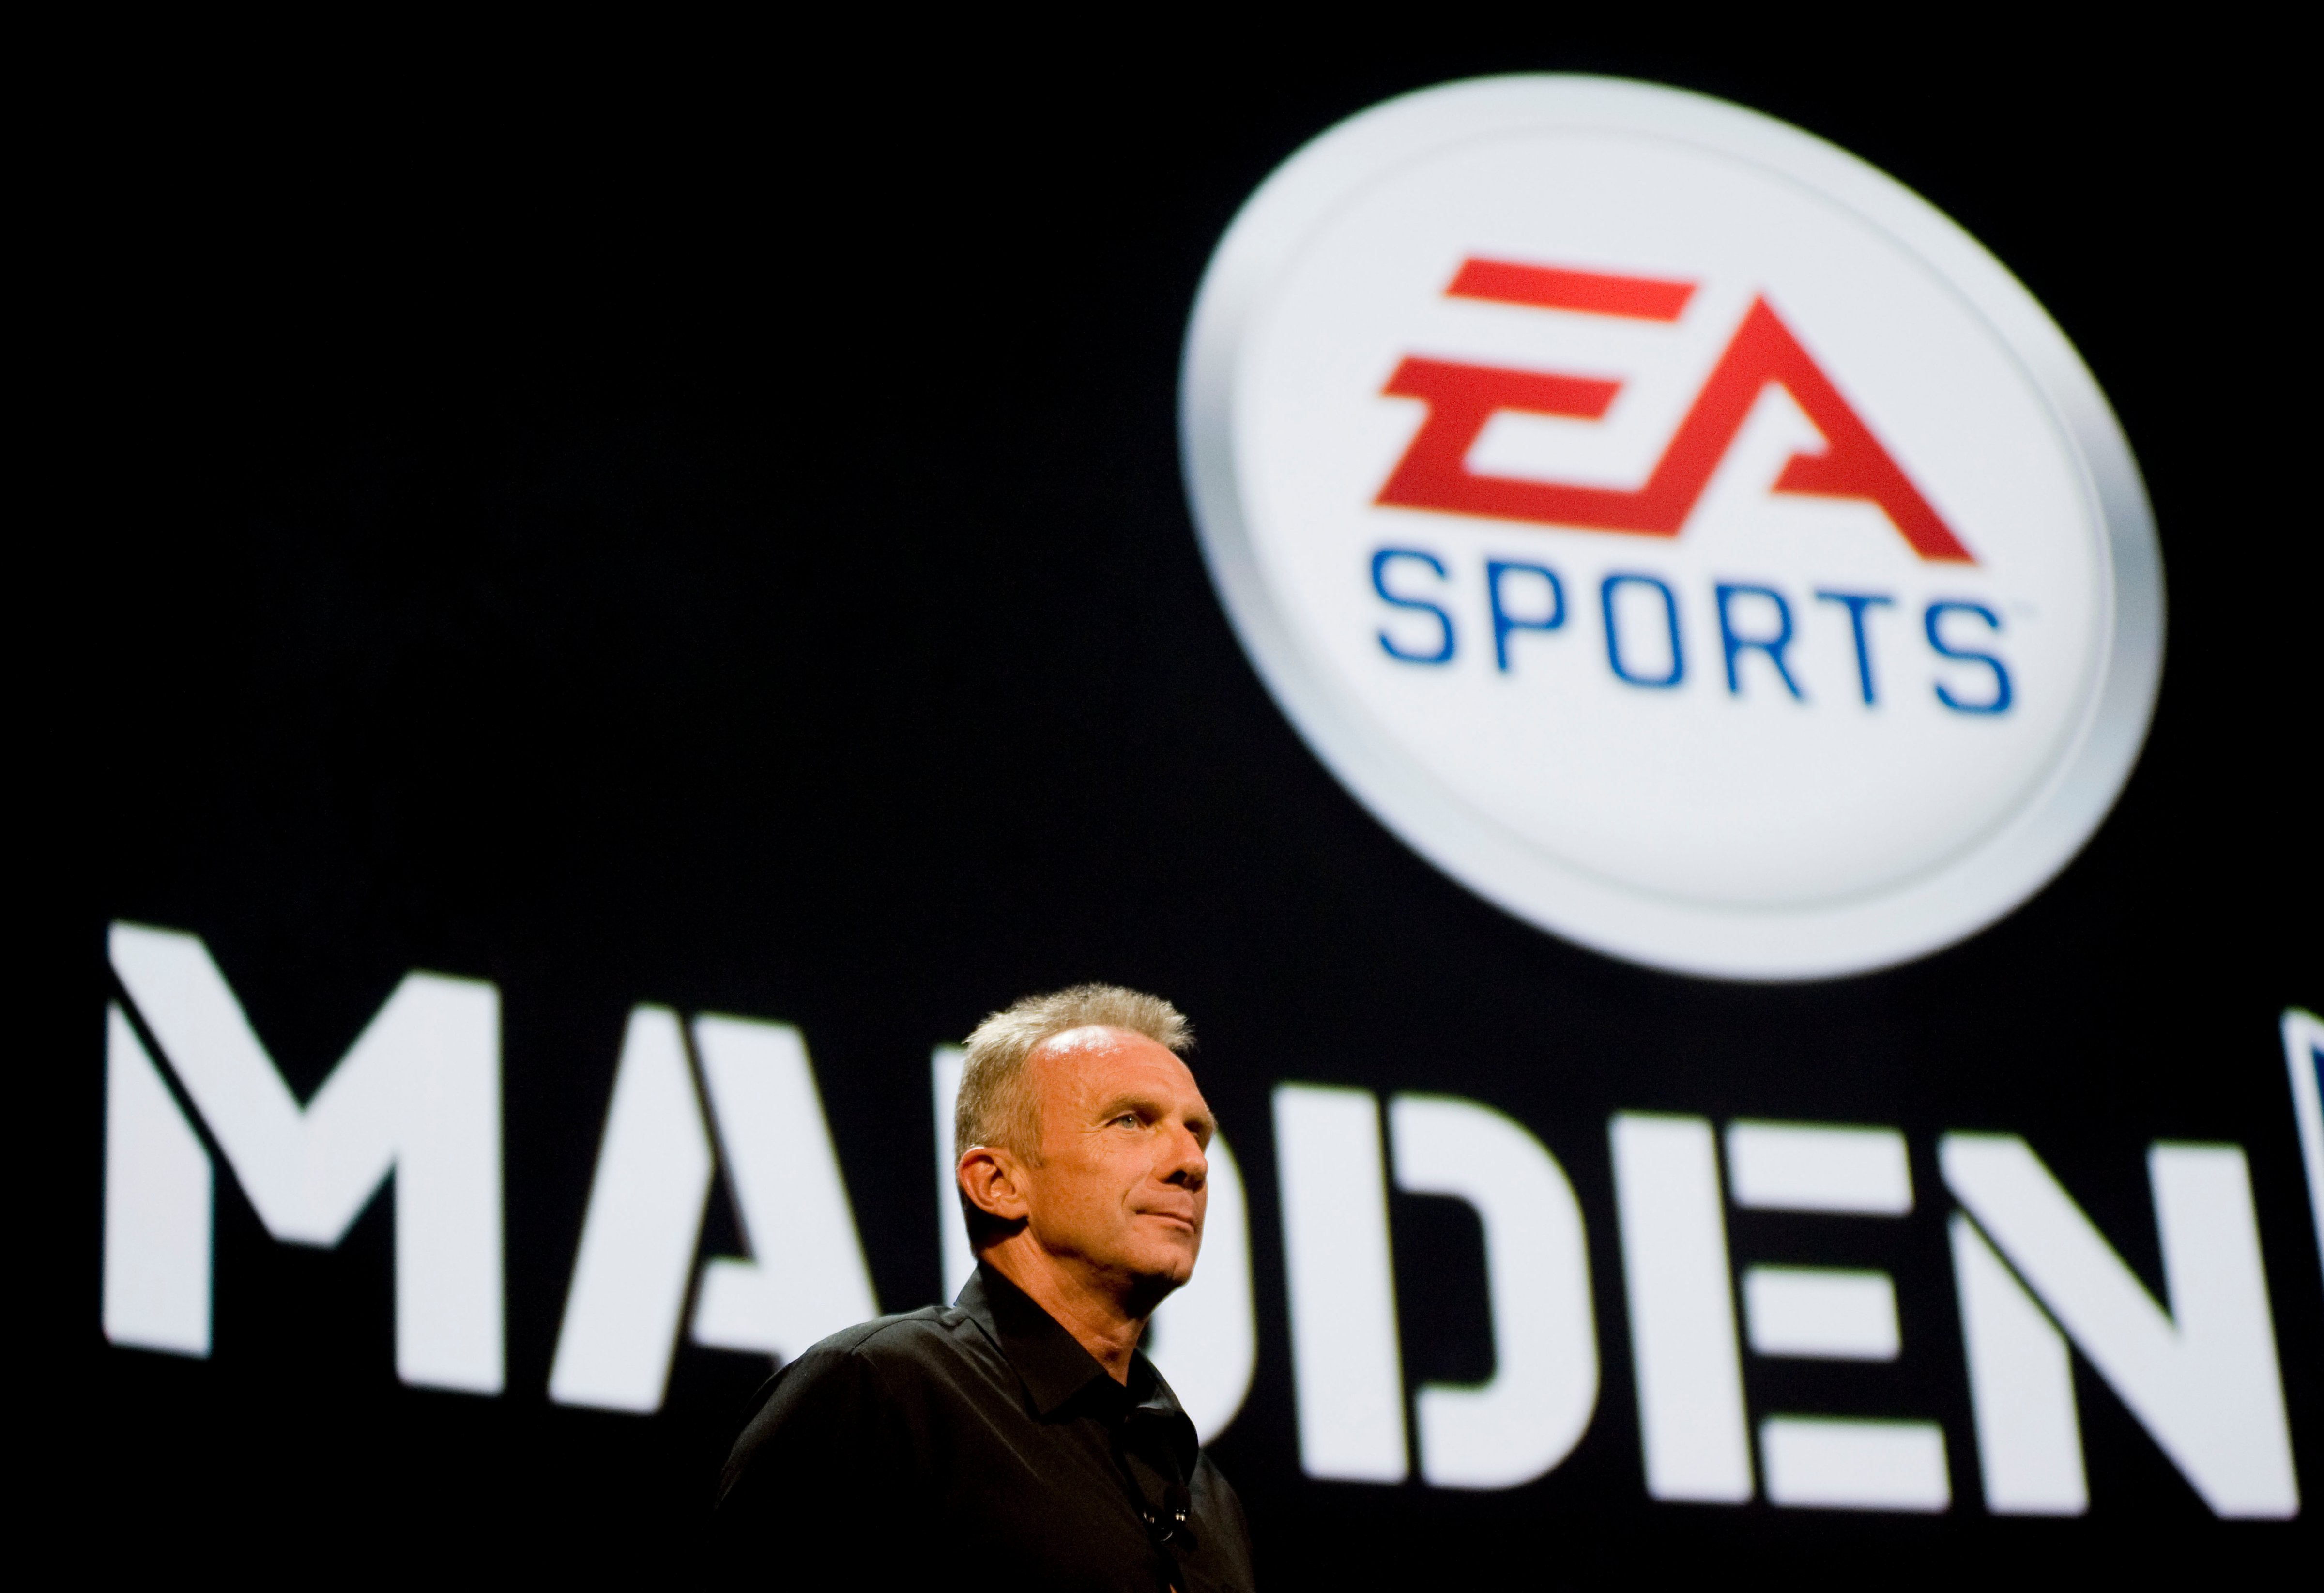 Former NFL quarterback Joe Montana helps introduce Electronic Arts Sports (EA Sports) new "Madden 2011" game at an EA press briefing ahead of the Electronic Entertainment Expo (E3) at the Orpheum Theater June 14, 2010 in Los Angeles, California. (Michal Czerwonka&mdash;Getty Images)